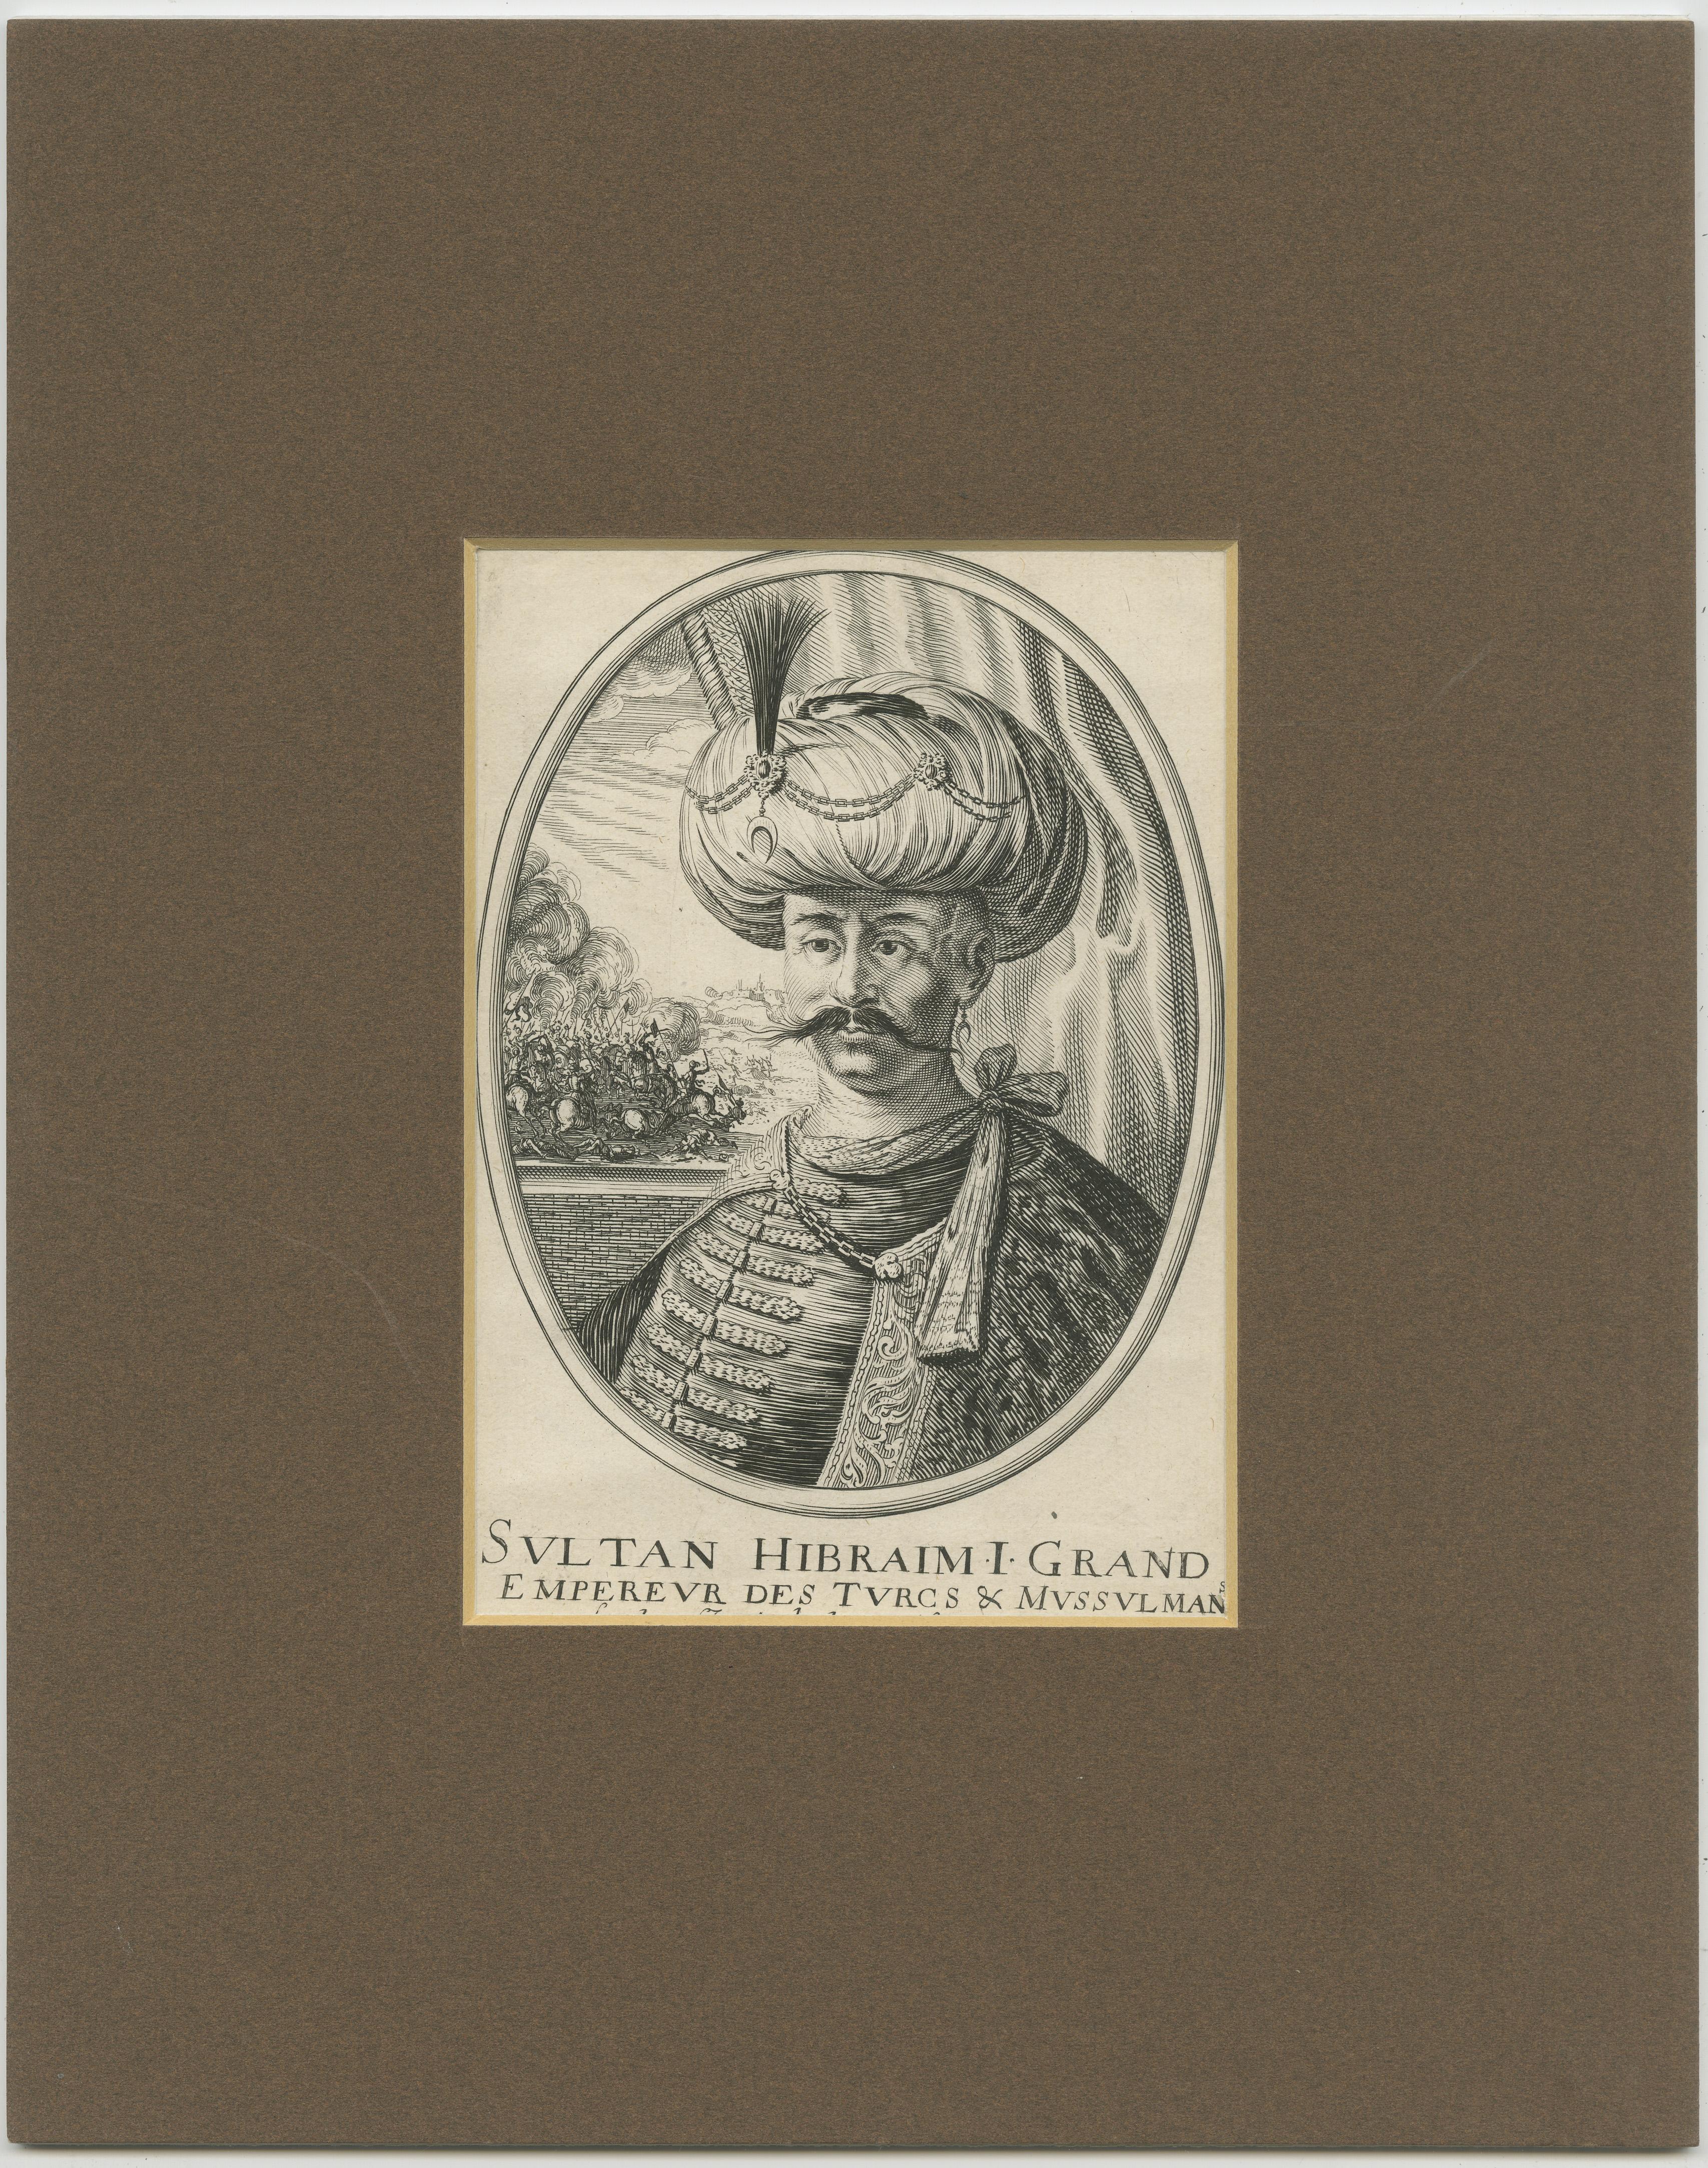 Antique print titled 'Sultan Hibraim I (..)'. Portrait of Ottoman sultan Ibrahim I, bust-length directed to left; in oval.

Published by Balthasar Moncornet, circa 1660. Balthasar Moncornet (b.1600 Rouen, France d.1668 Paris, France) was a French